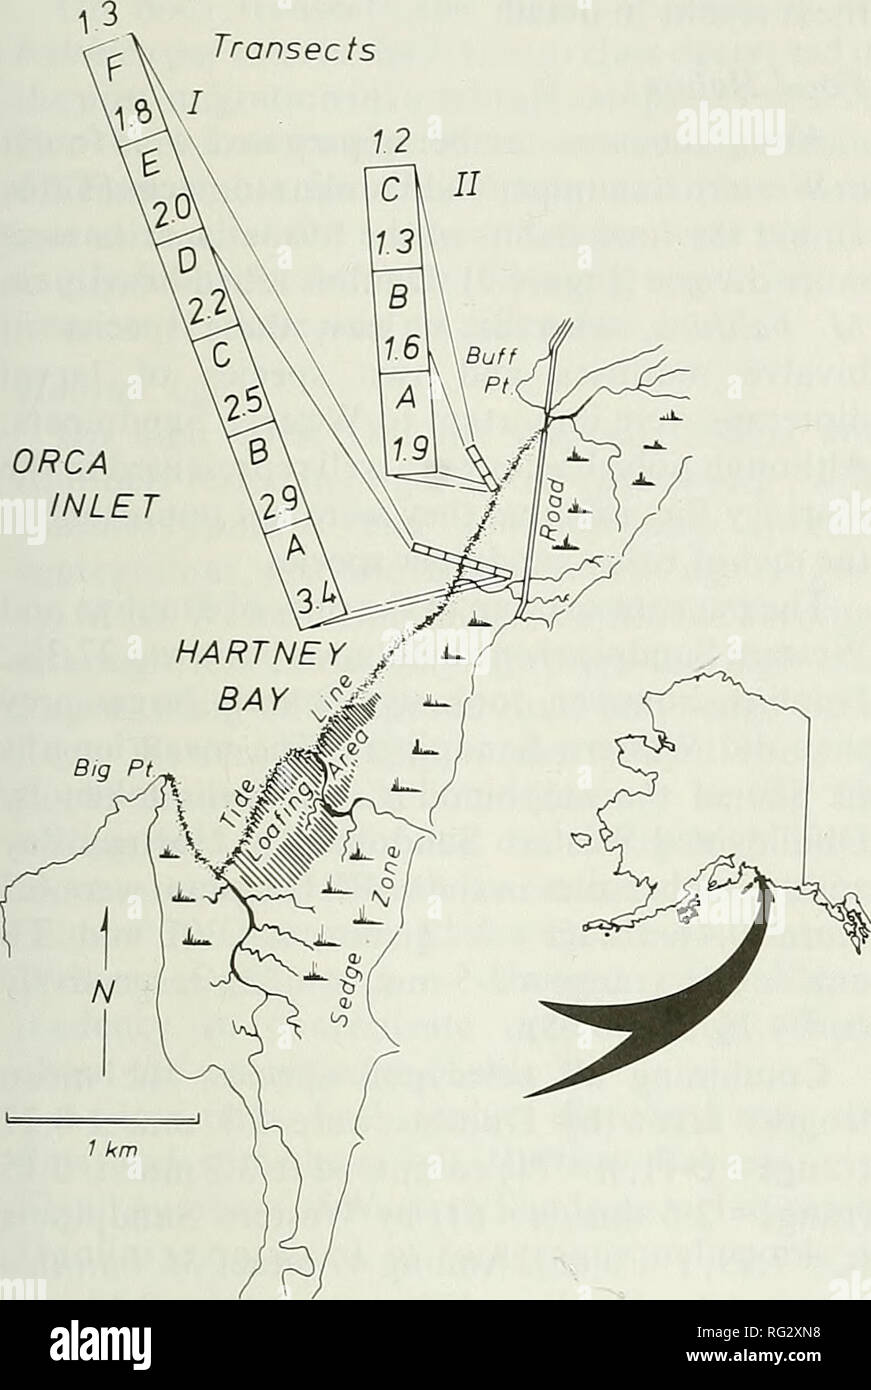 . The Canadian field-naturalist. 1989 Senner, Norton, and West: Western Sandpipers and Dunlins 373 Transects. Figure 1. Map of the Hartney Bay study site, with an inset showing the location of Hartney Bay in Alaska. The tide line approximates a 3/4 high tide. The enlarged transects show transect numbers, zones, and approximate tidal elevations (m). feeding shorebirds were concentrated and easily visible from the Hartney Bay road (Figure 1). Because of the distance to it (ca. 1 km) and low- density usage by shorebirds of the lower intertidal zone, the transects did not extend to the mean low wa Stock Photo